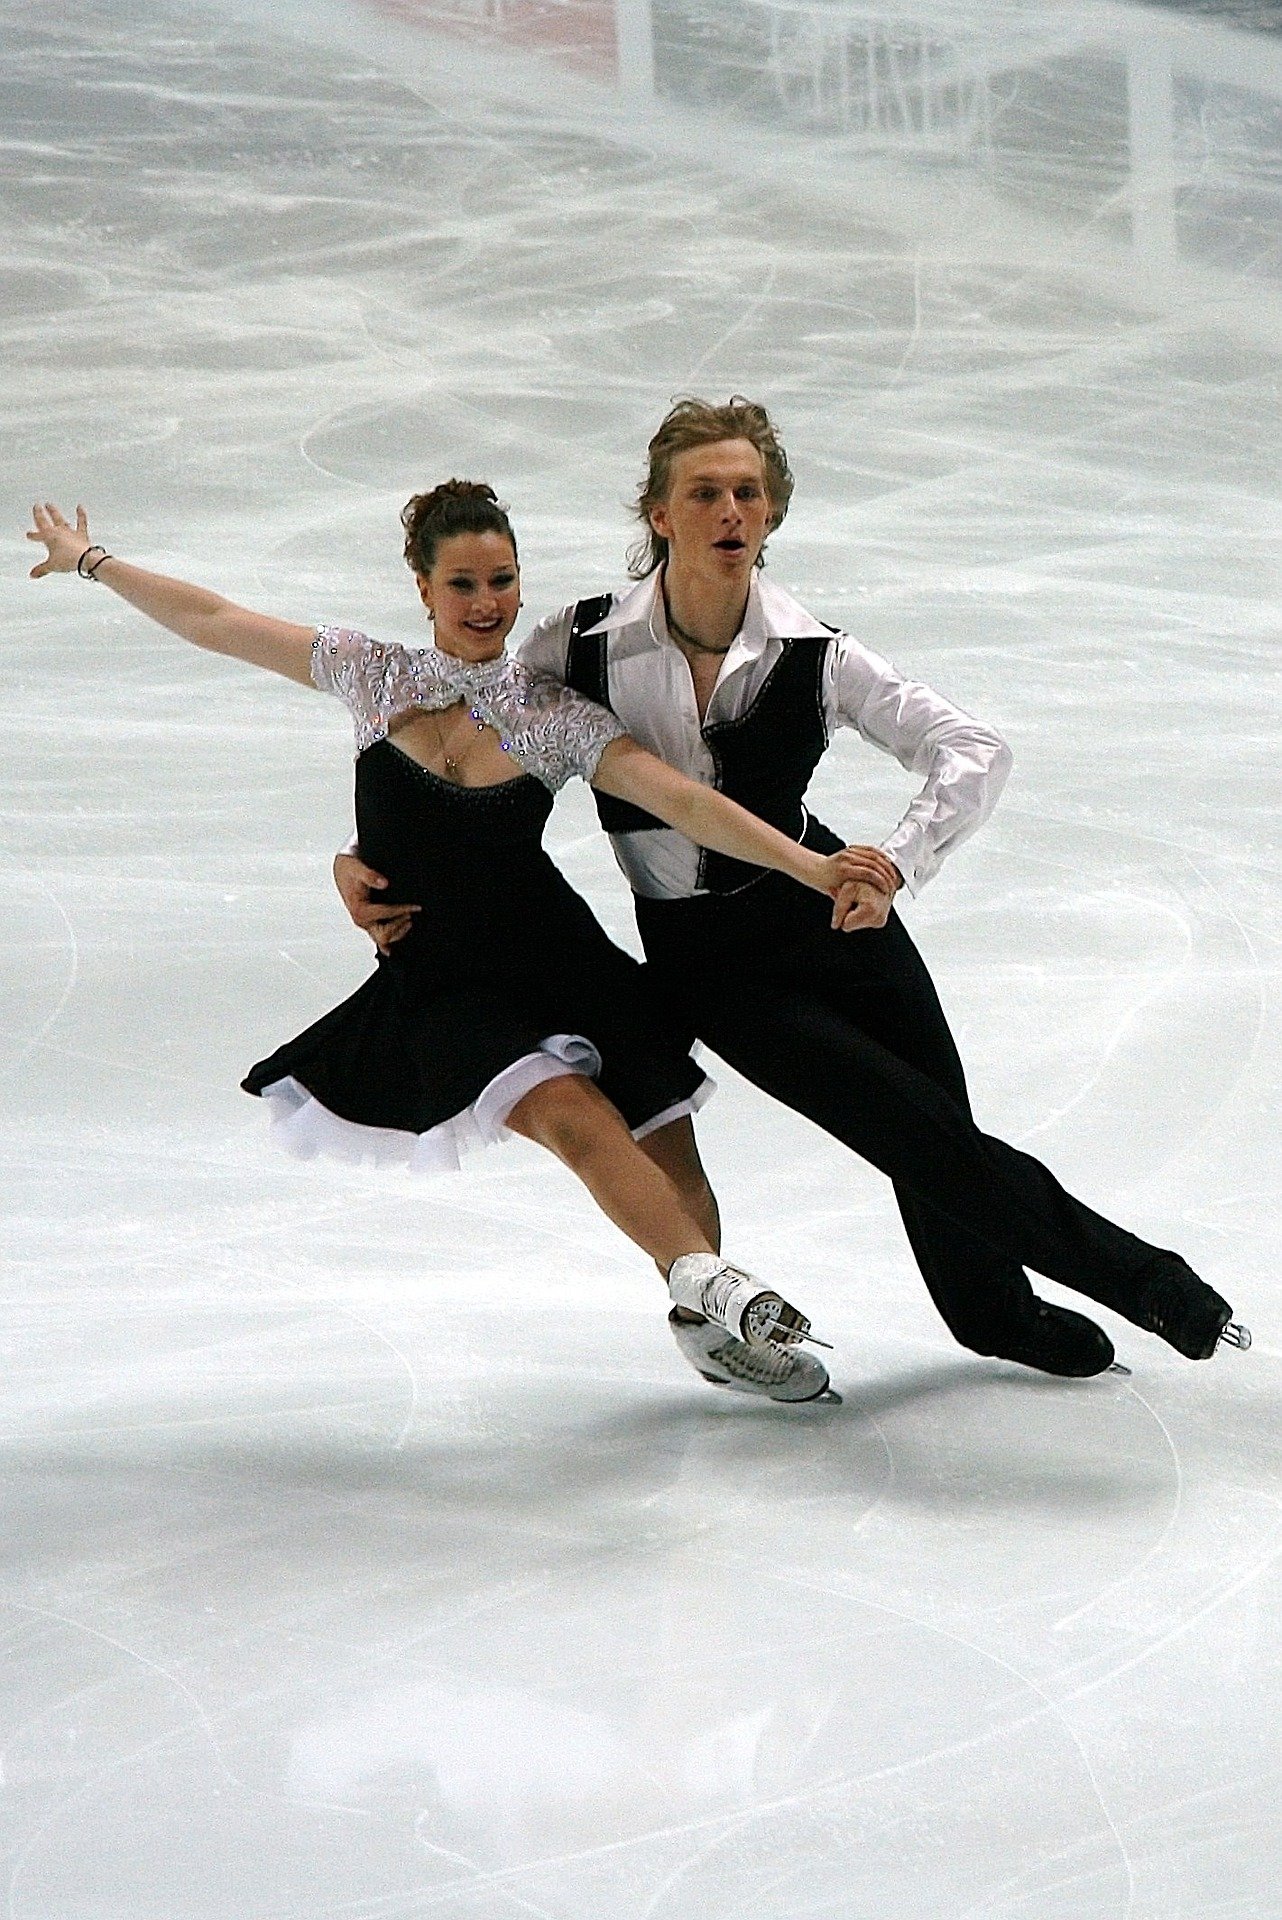 Pictured - Figure skating dancing couple at the championships | Source: Pixabay